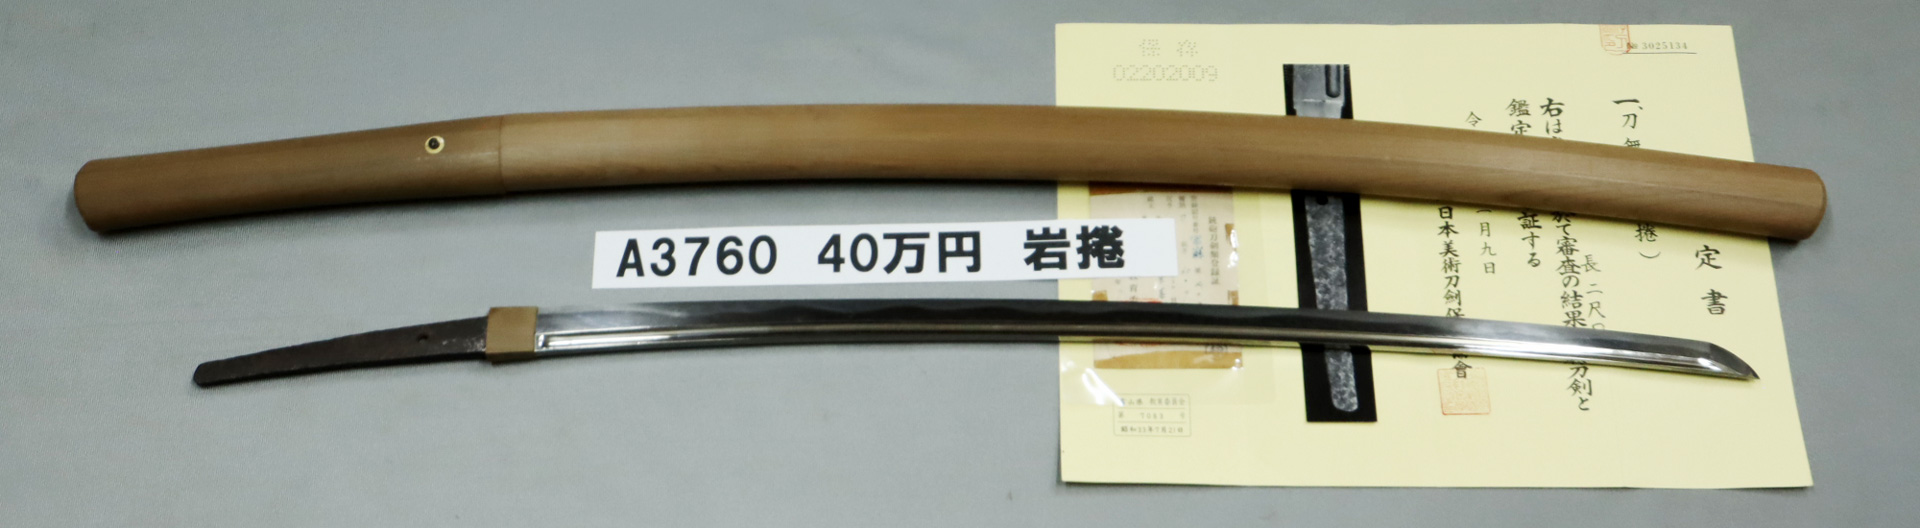 「A3760　40万円　岩捲」の画像